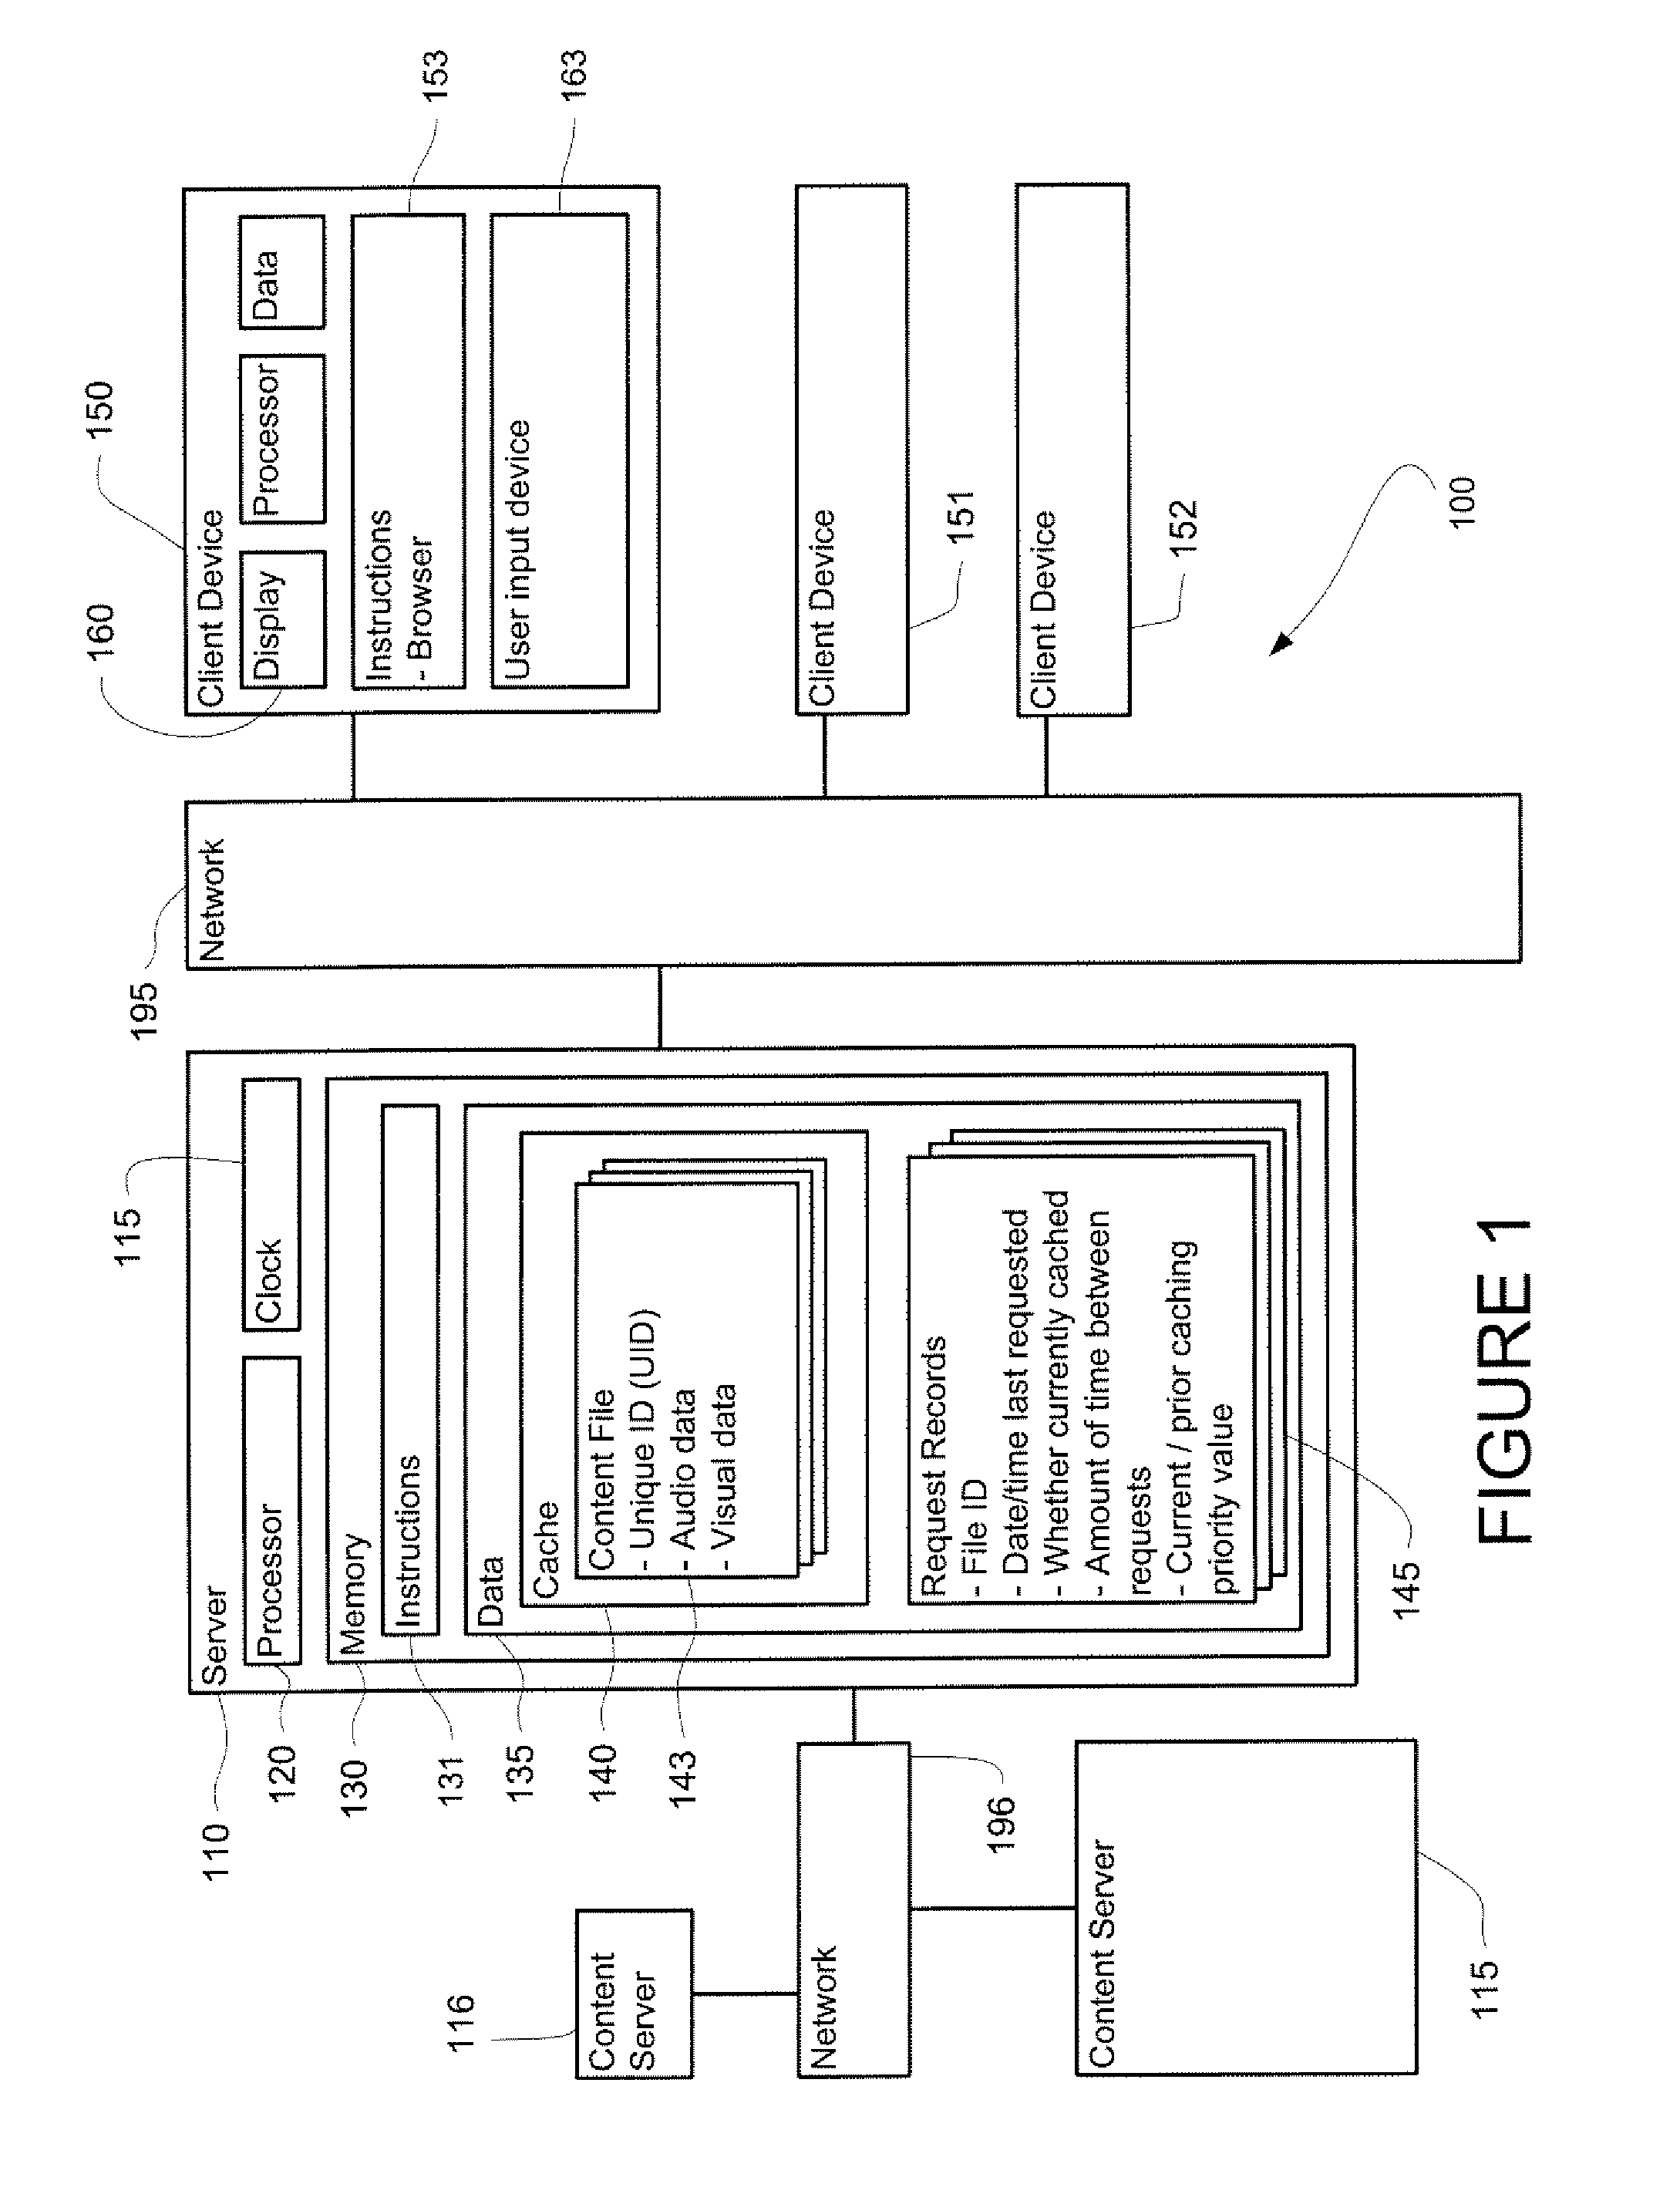 System and method of caching information